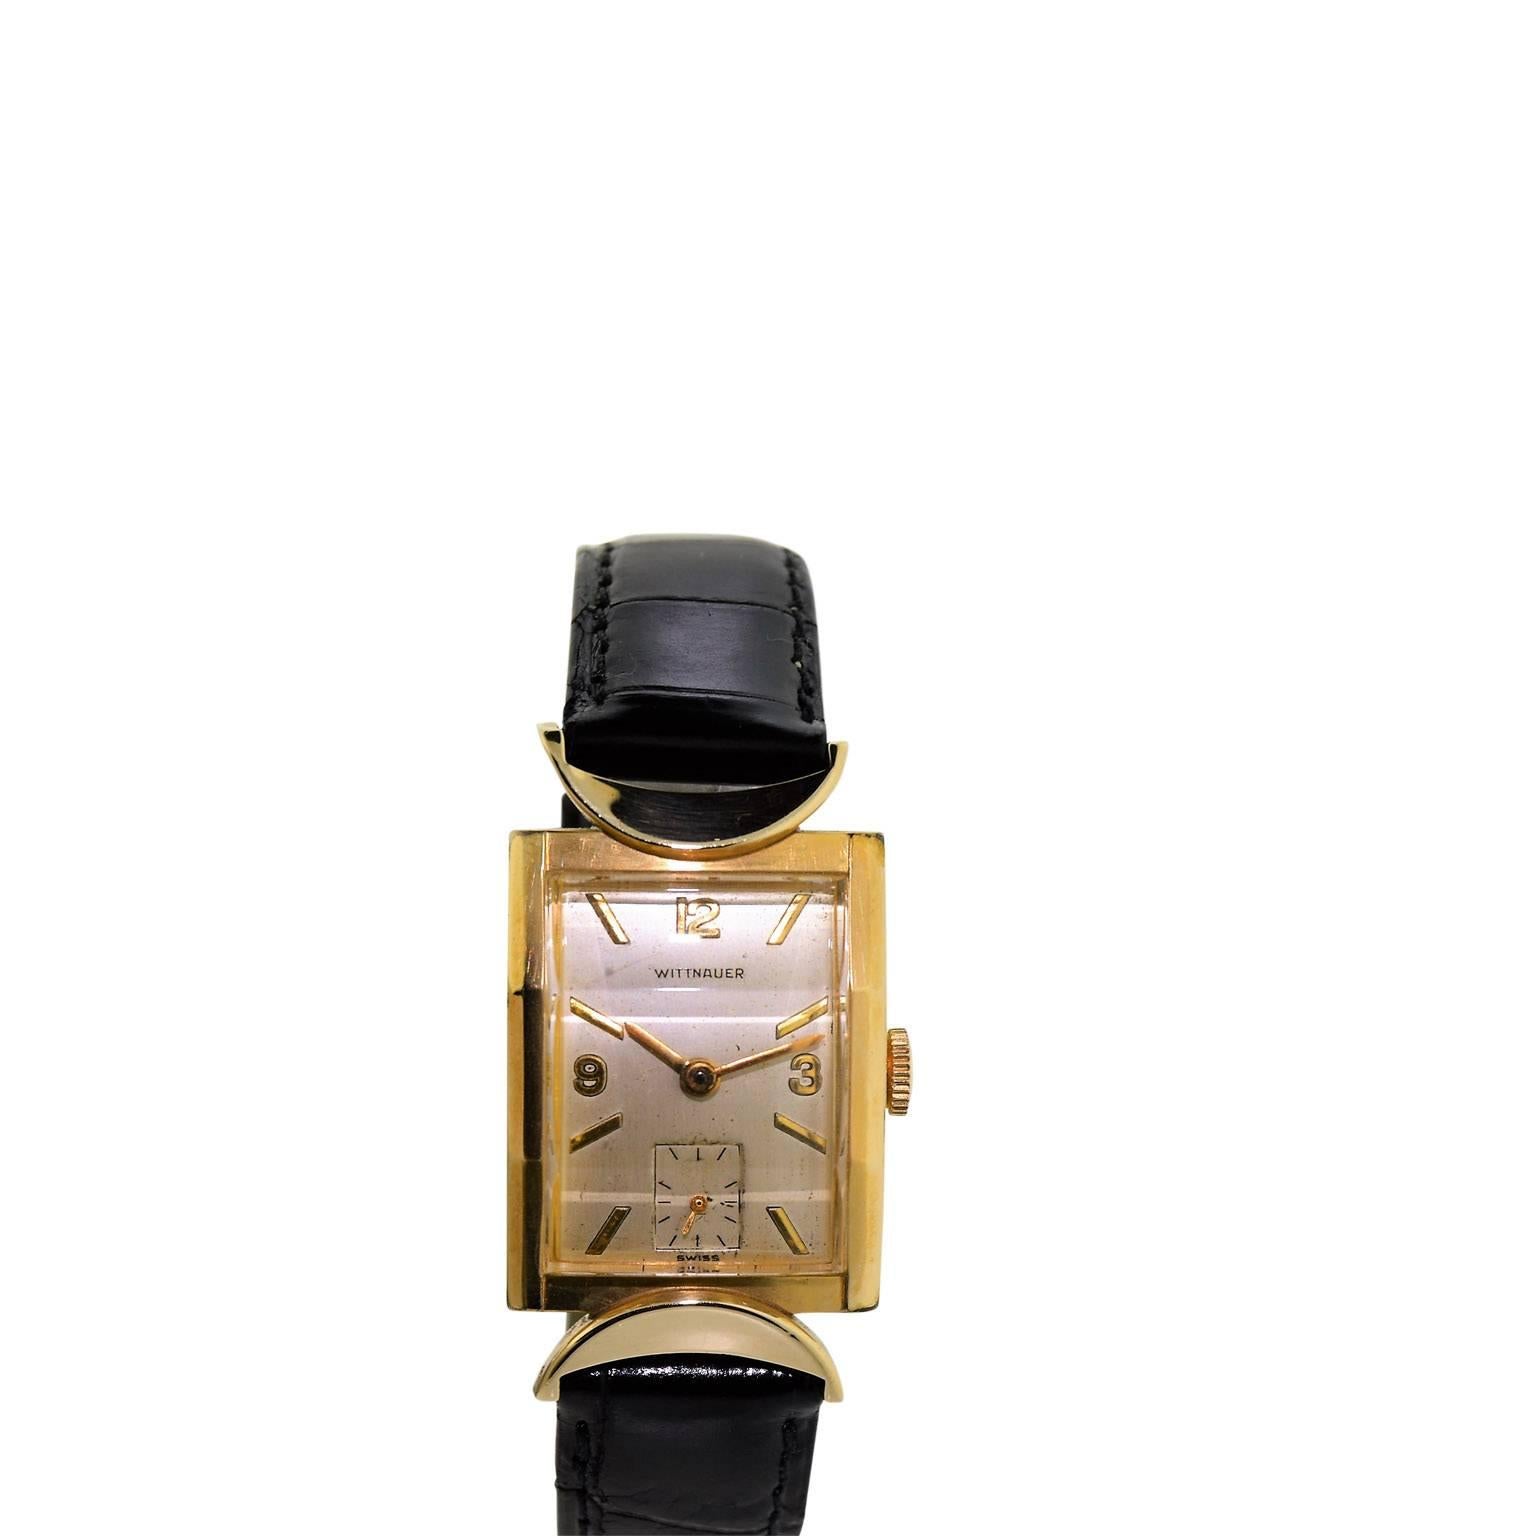 Wittnauer Yellow Gold Filled Art Deco Watch with Original Box, circa 1940s 1